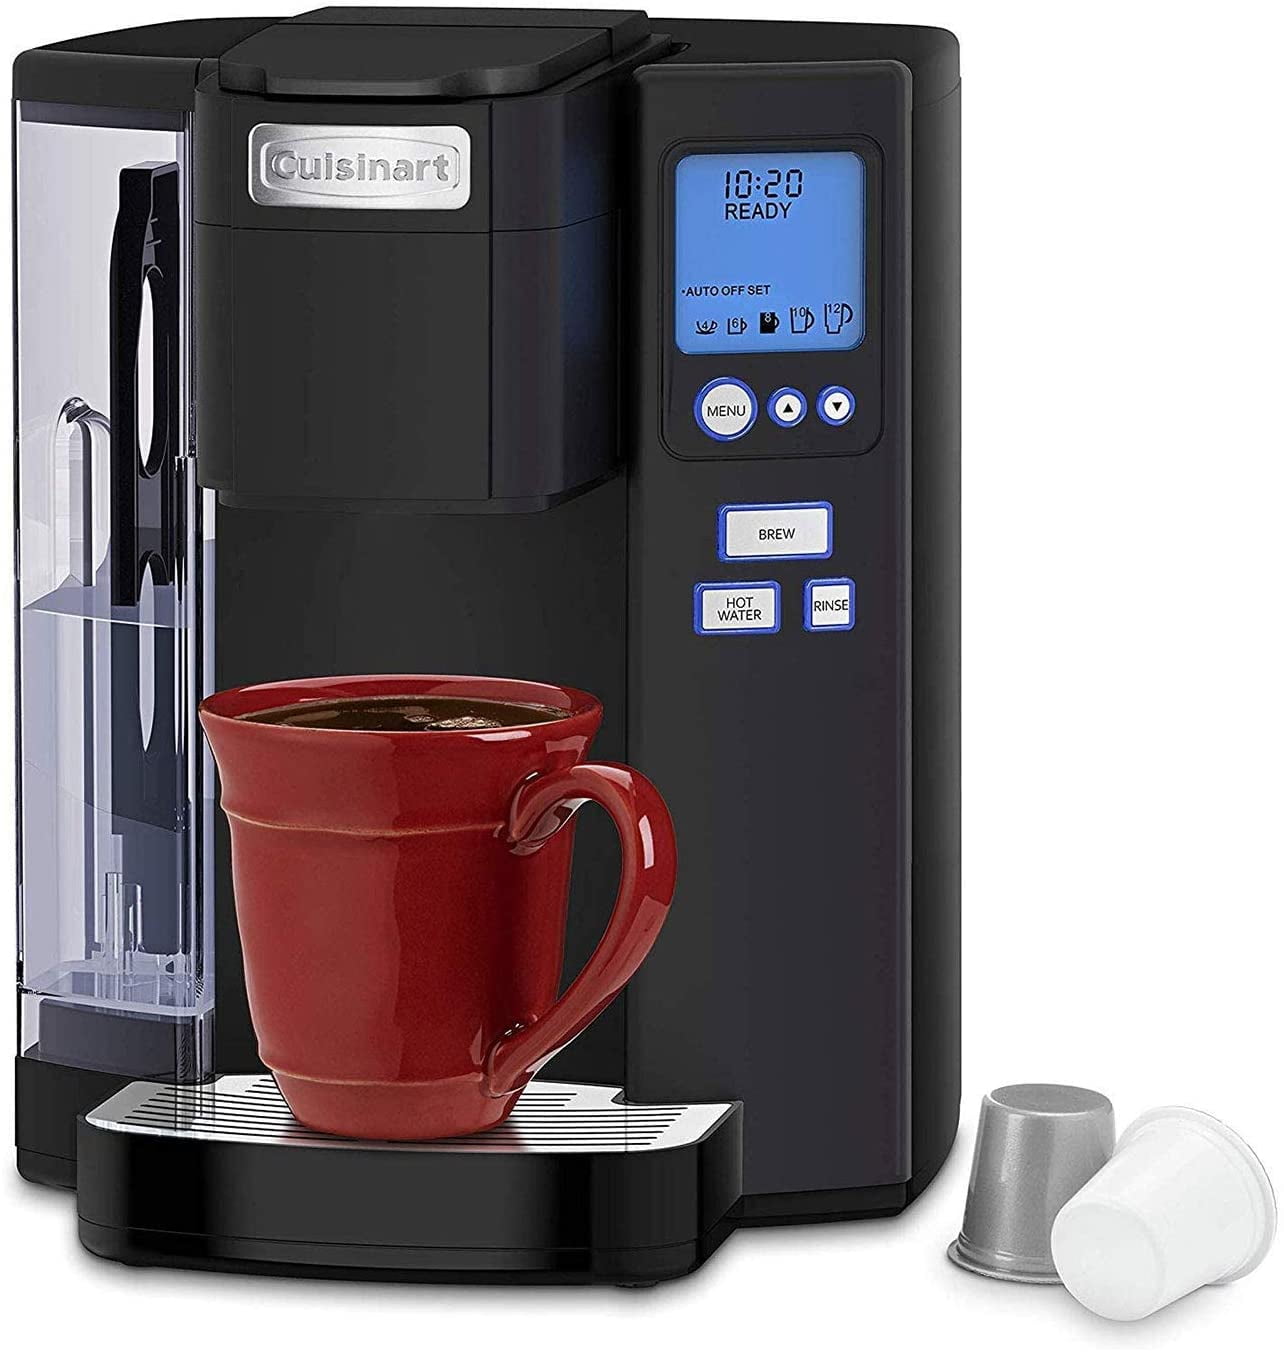 Cuisinart SS-5P1 Compact Single Serve Coffee Brewer - 9891948